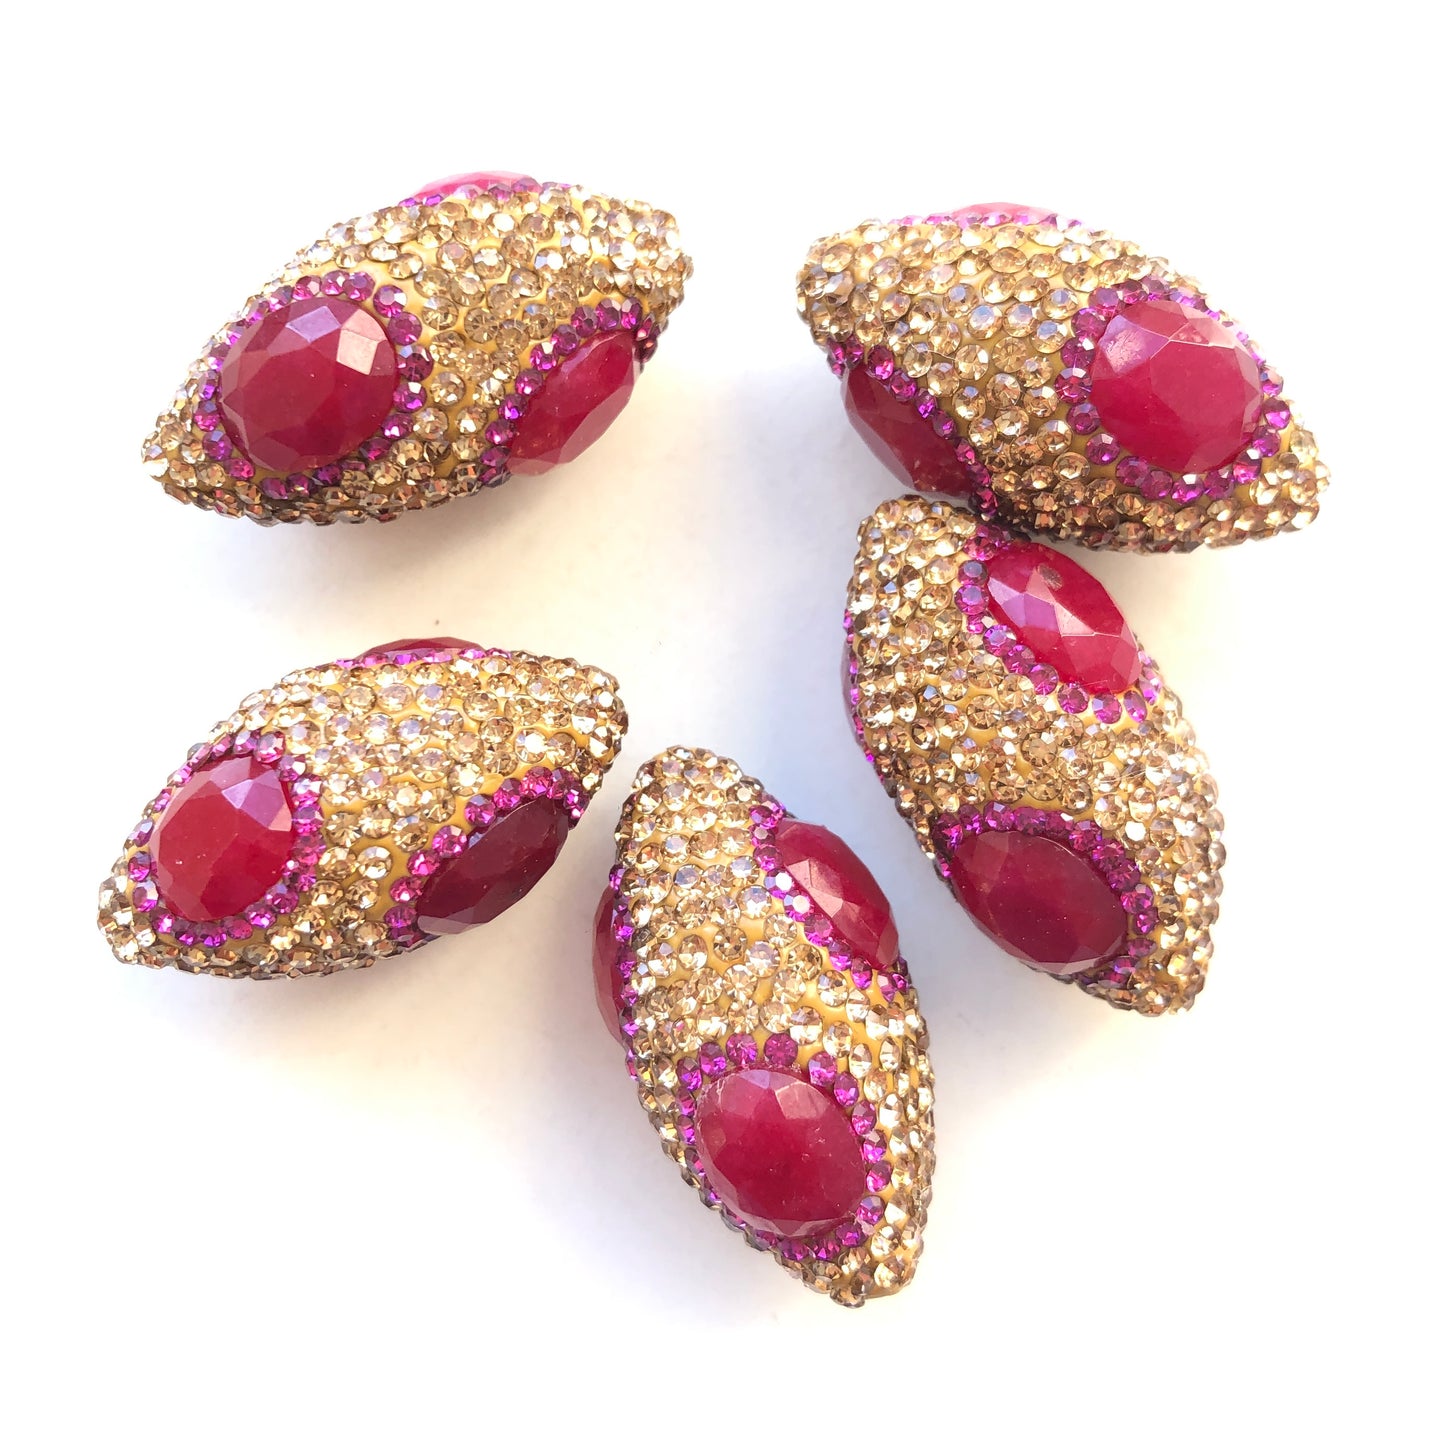 1PC Multicolor Rhinestone Pave Oval Spacers / Focal Beads Rhinestone Spacers Focal Beads Charms Beads Beyond